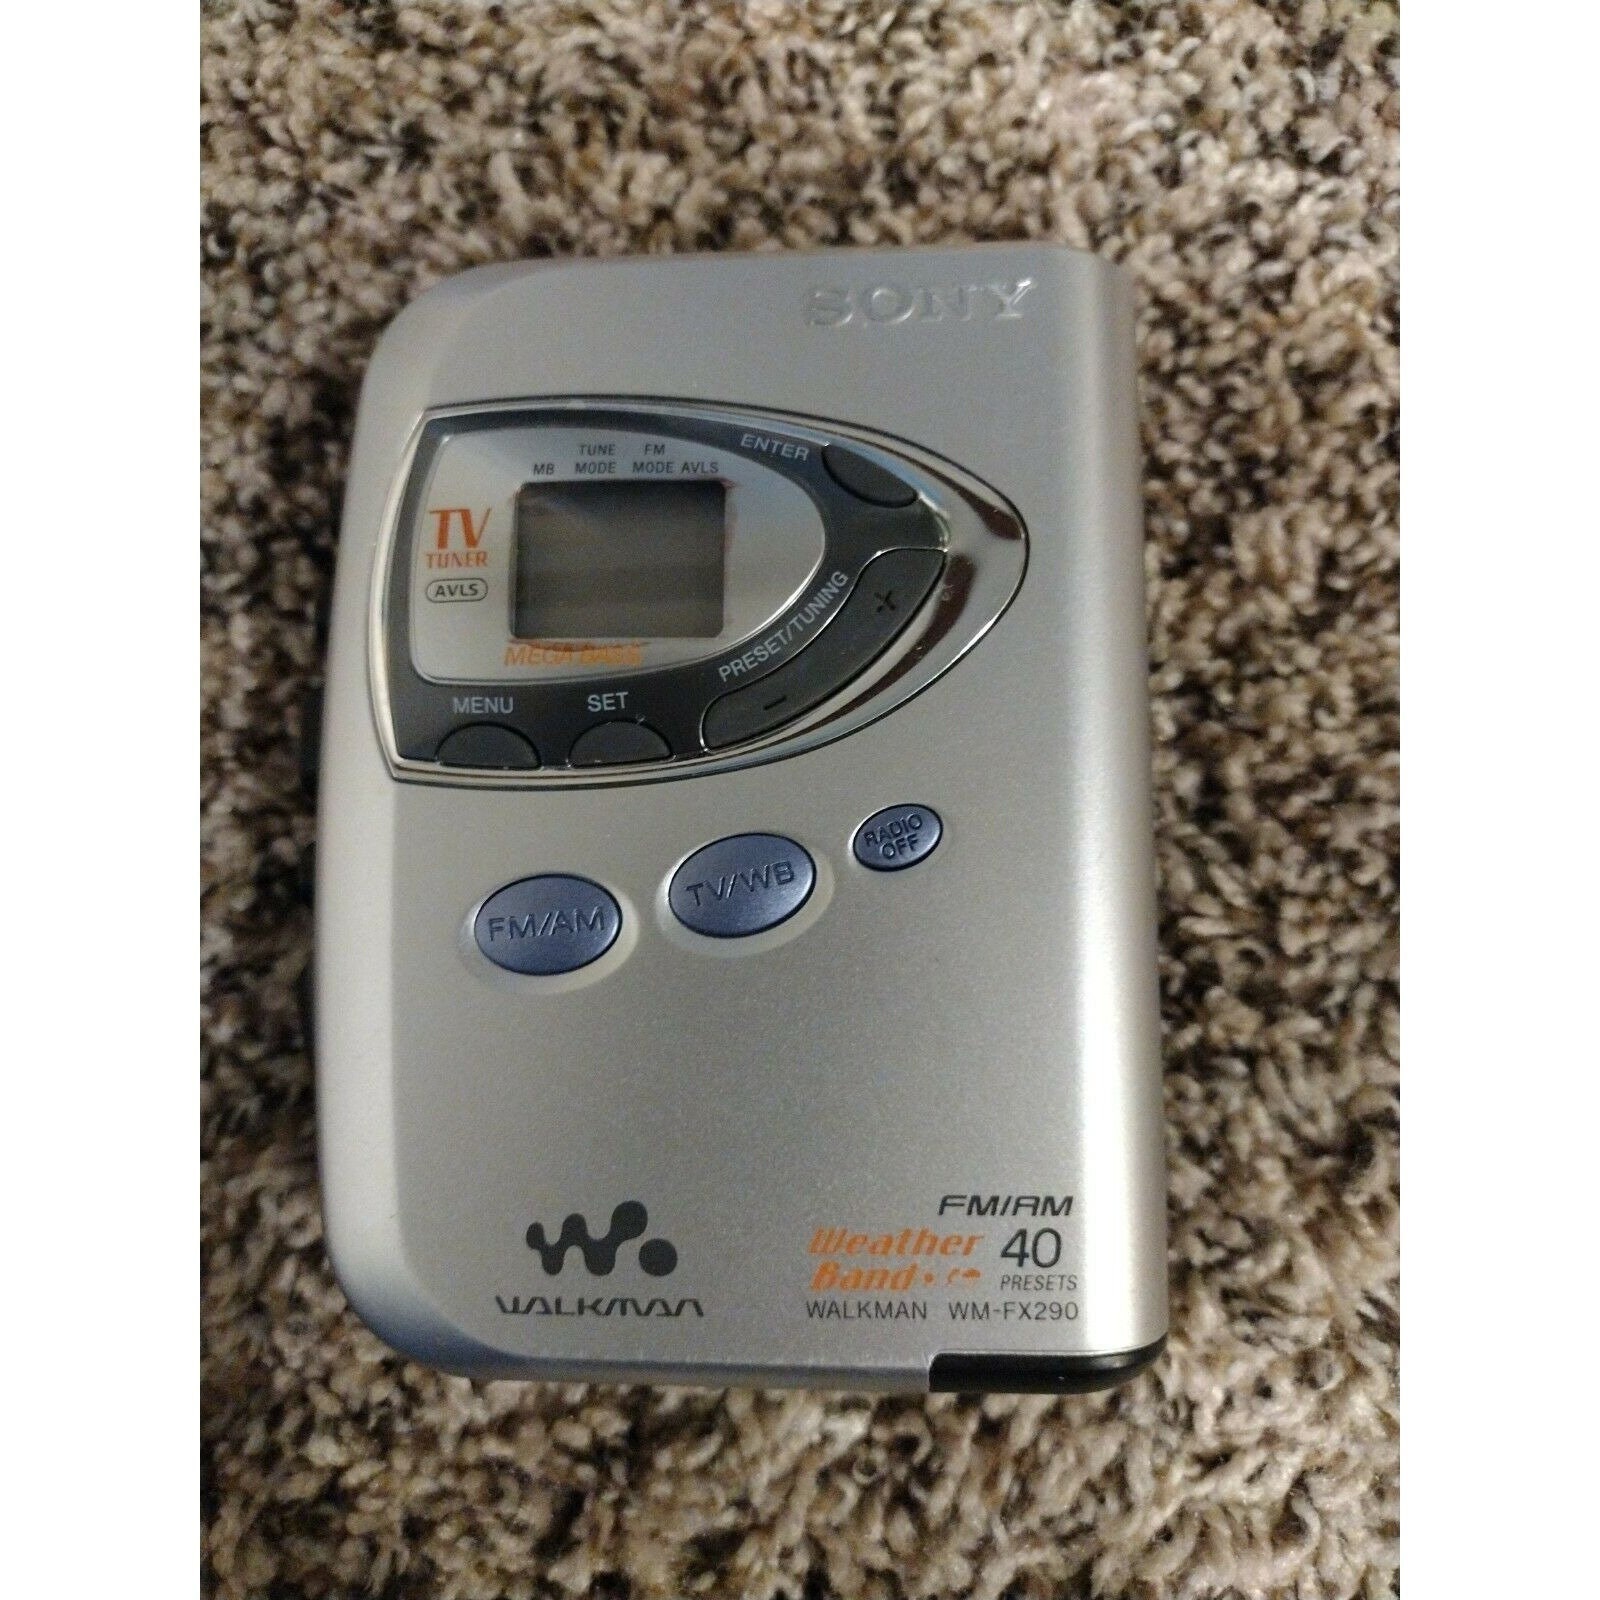 Sony Walkman Digital Tuning Weather Band / AM/FM Stereo Cassette Player